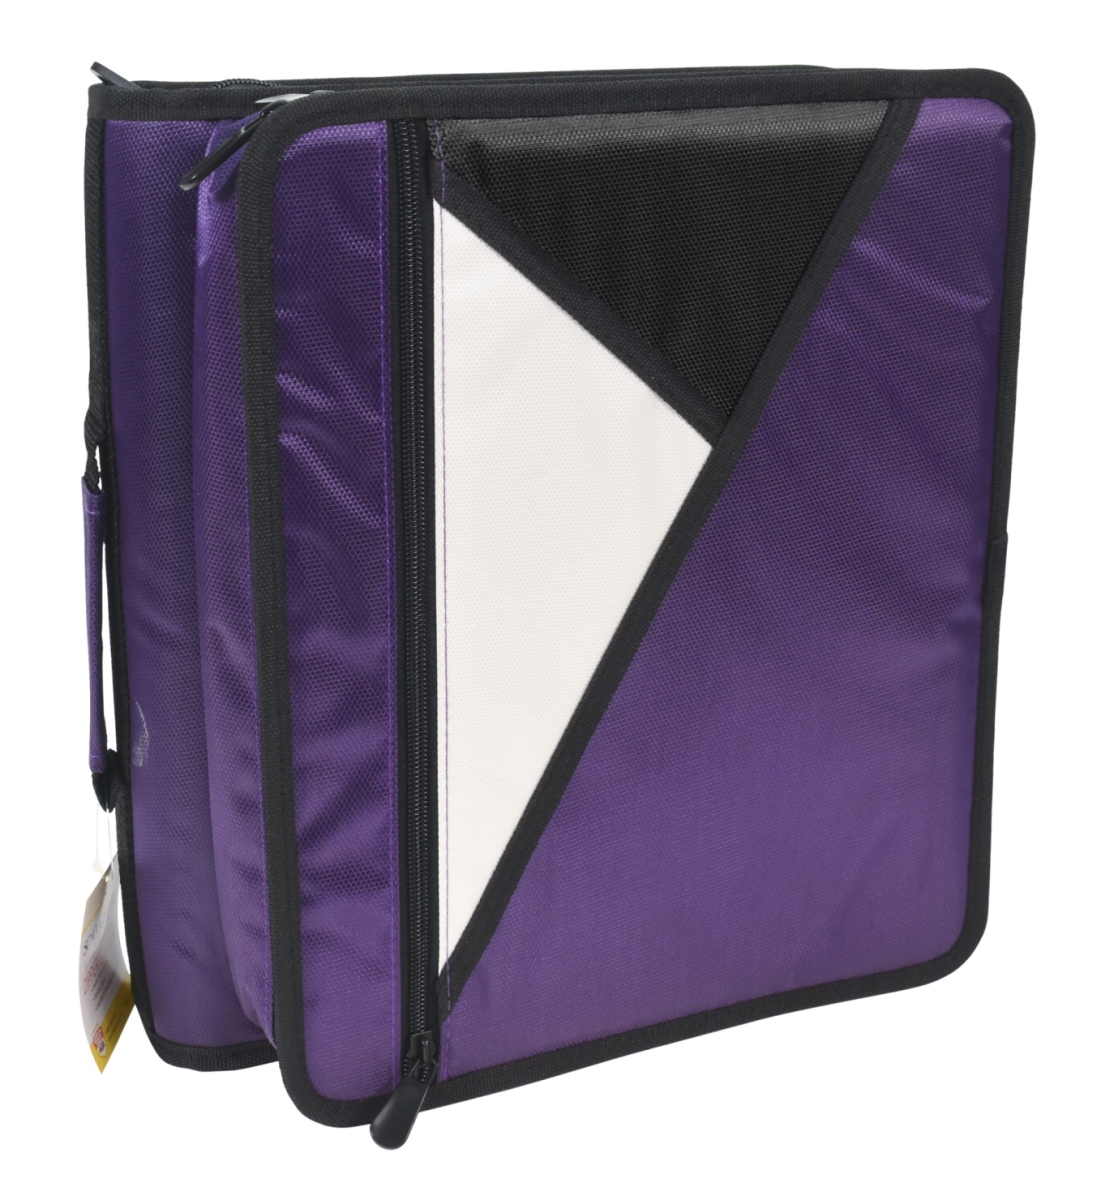 2019457 2 In. Round Ring Zipper Binder With Laptop Compartment, Purple